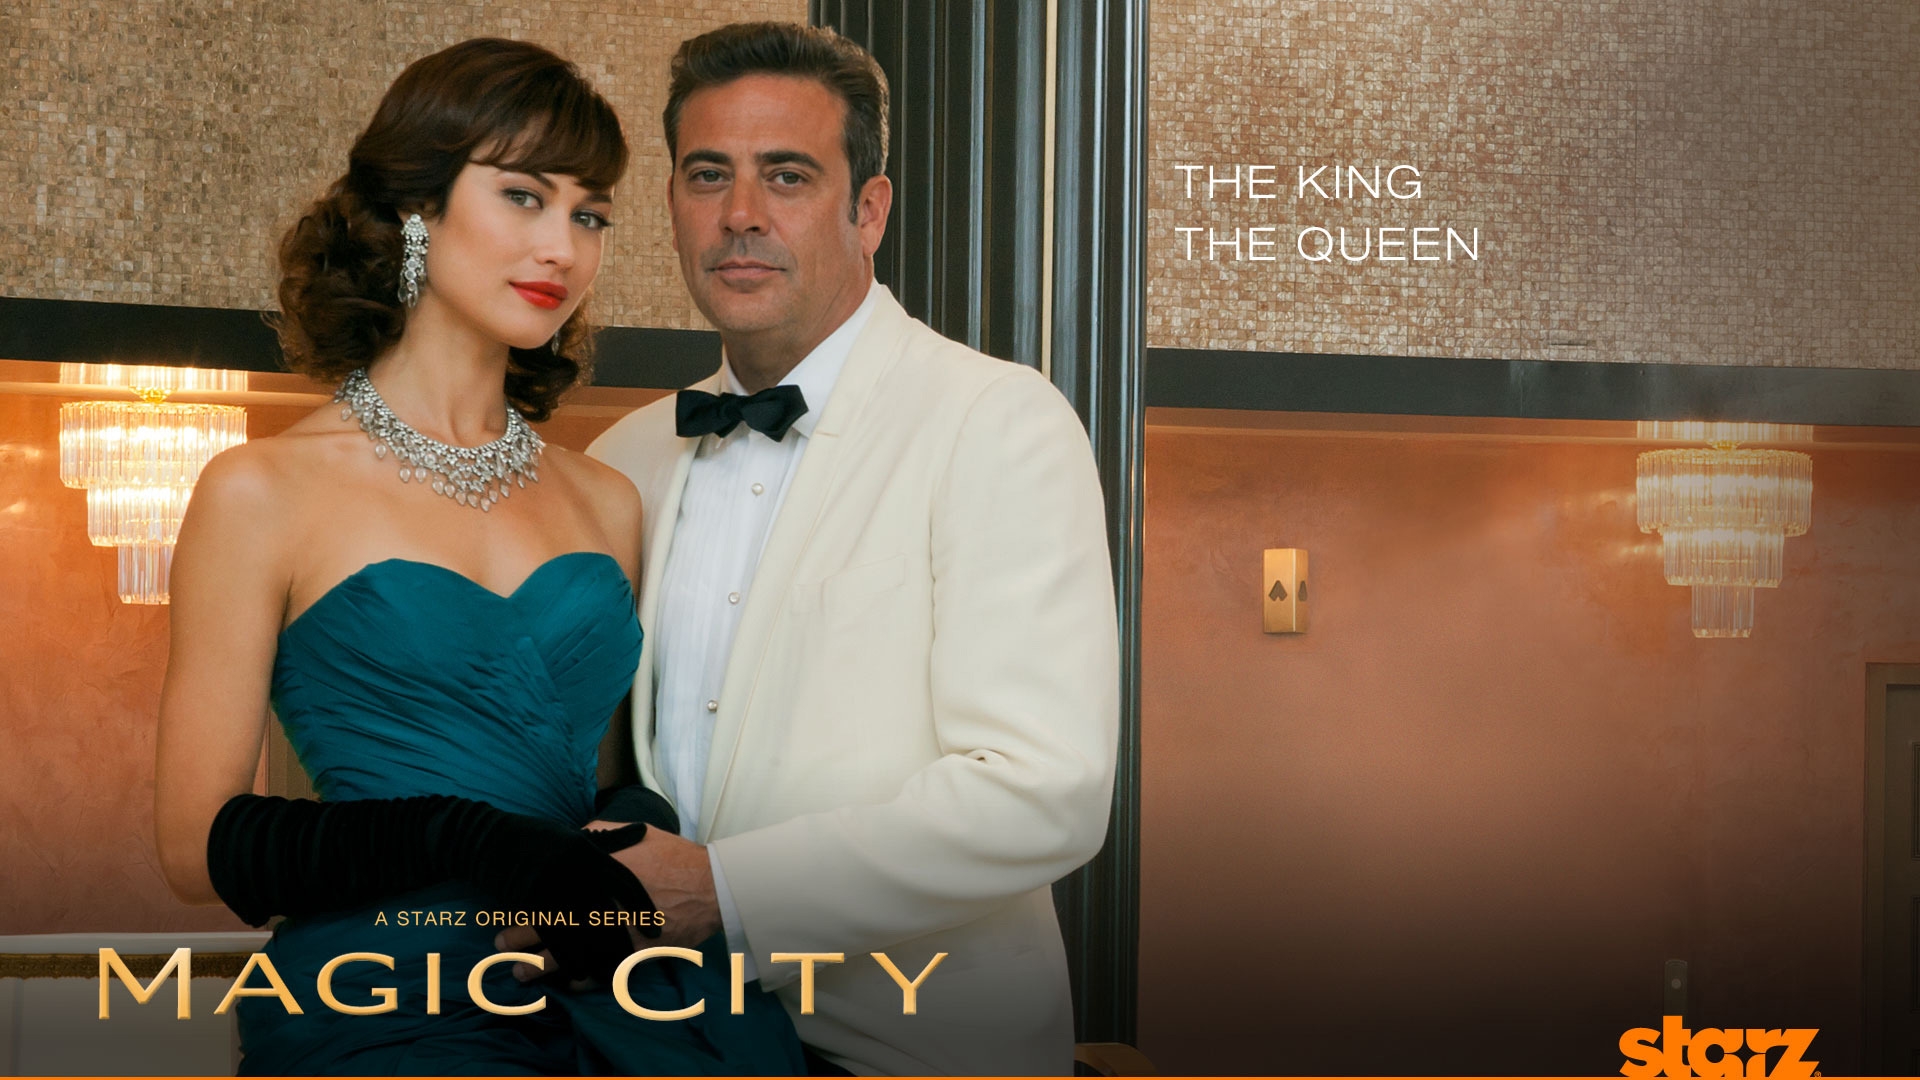 Magic City The King and The Queen for 1920 x 1080 HDTV 1080p resolution